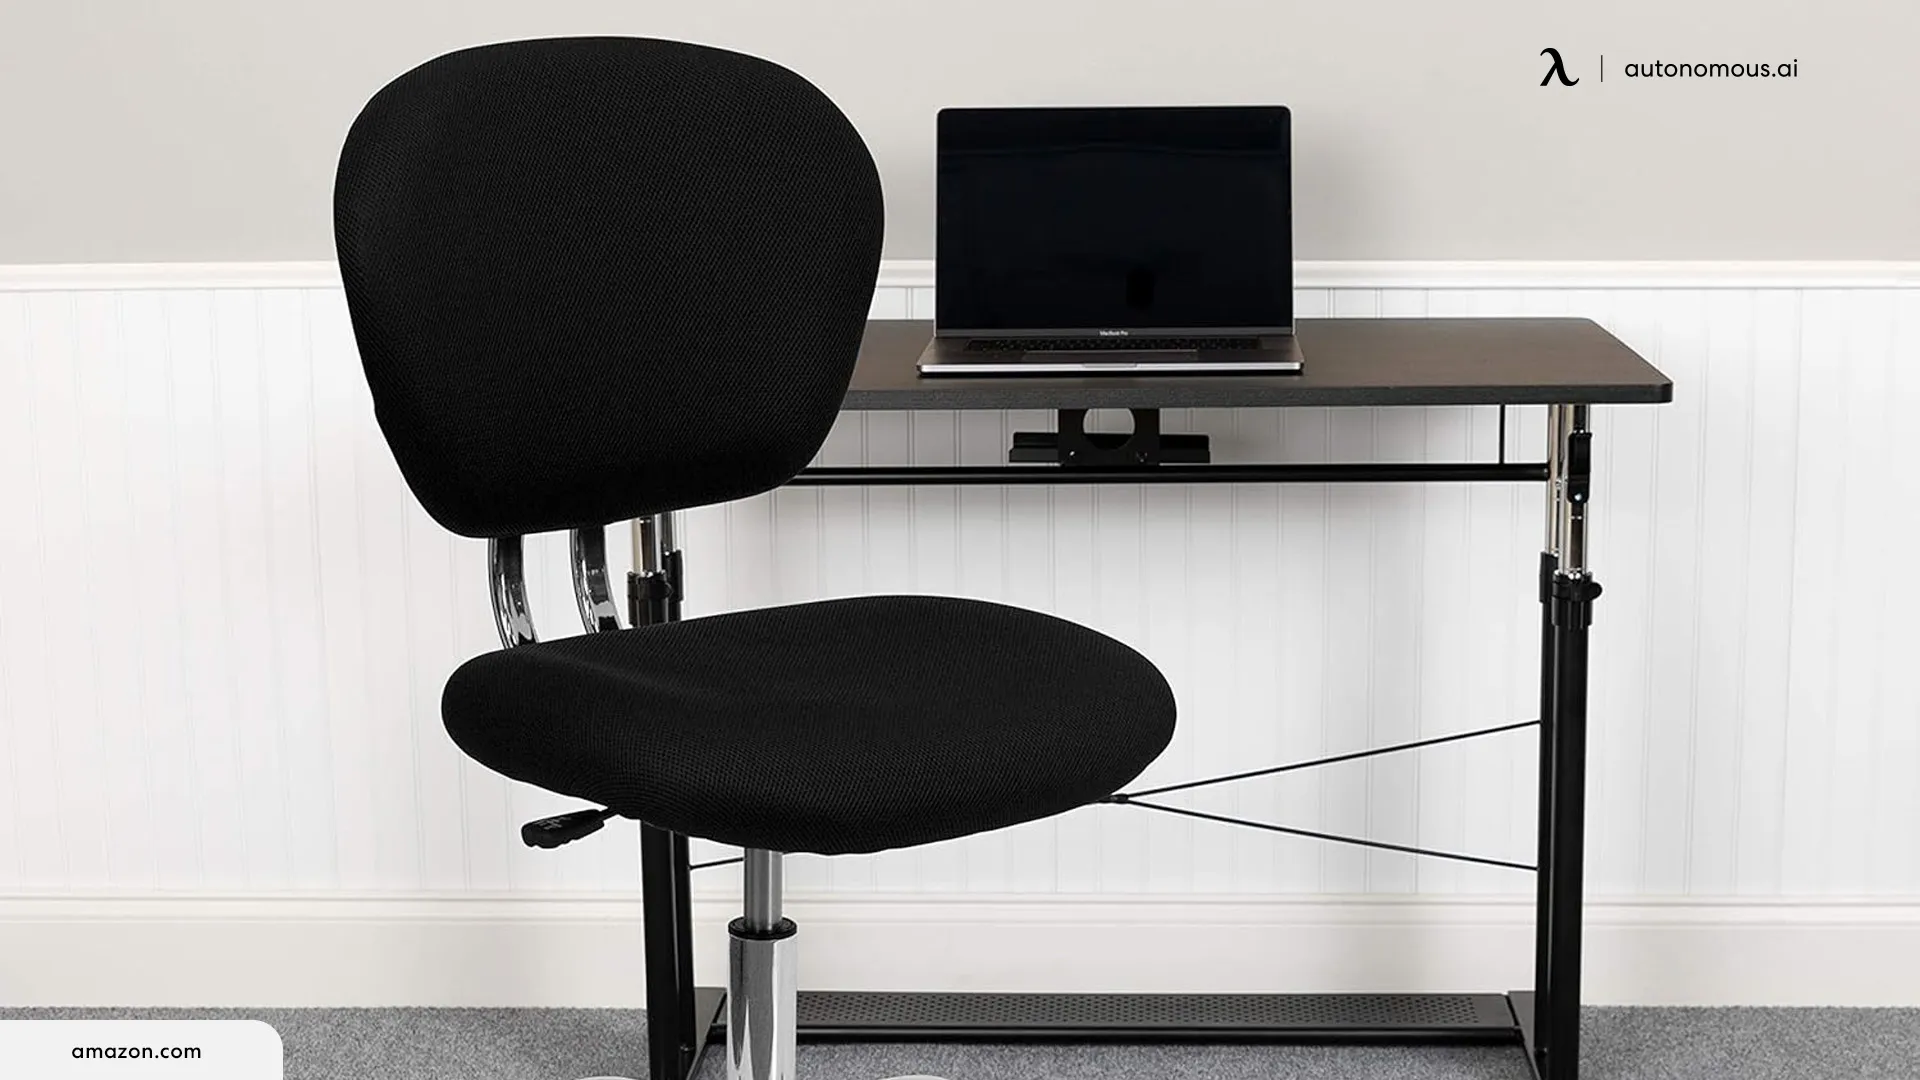 Mesh Office Chair Showdown: Arms or No Arms?